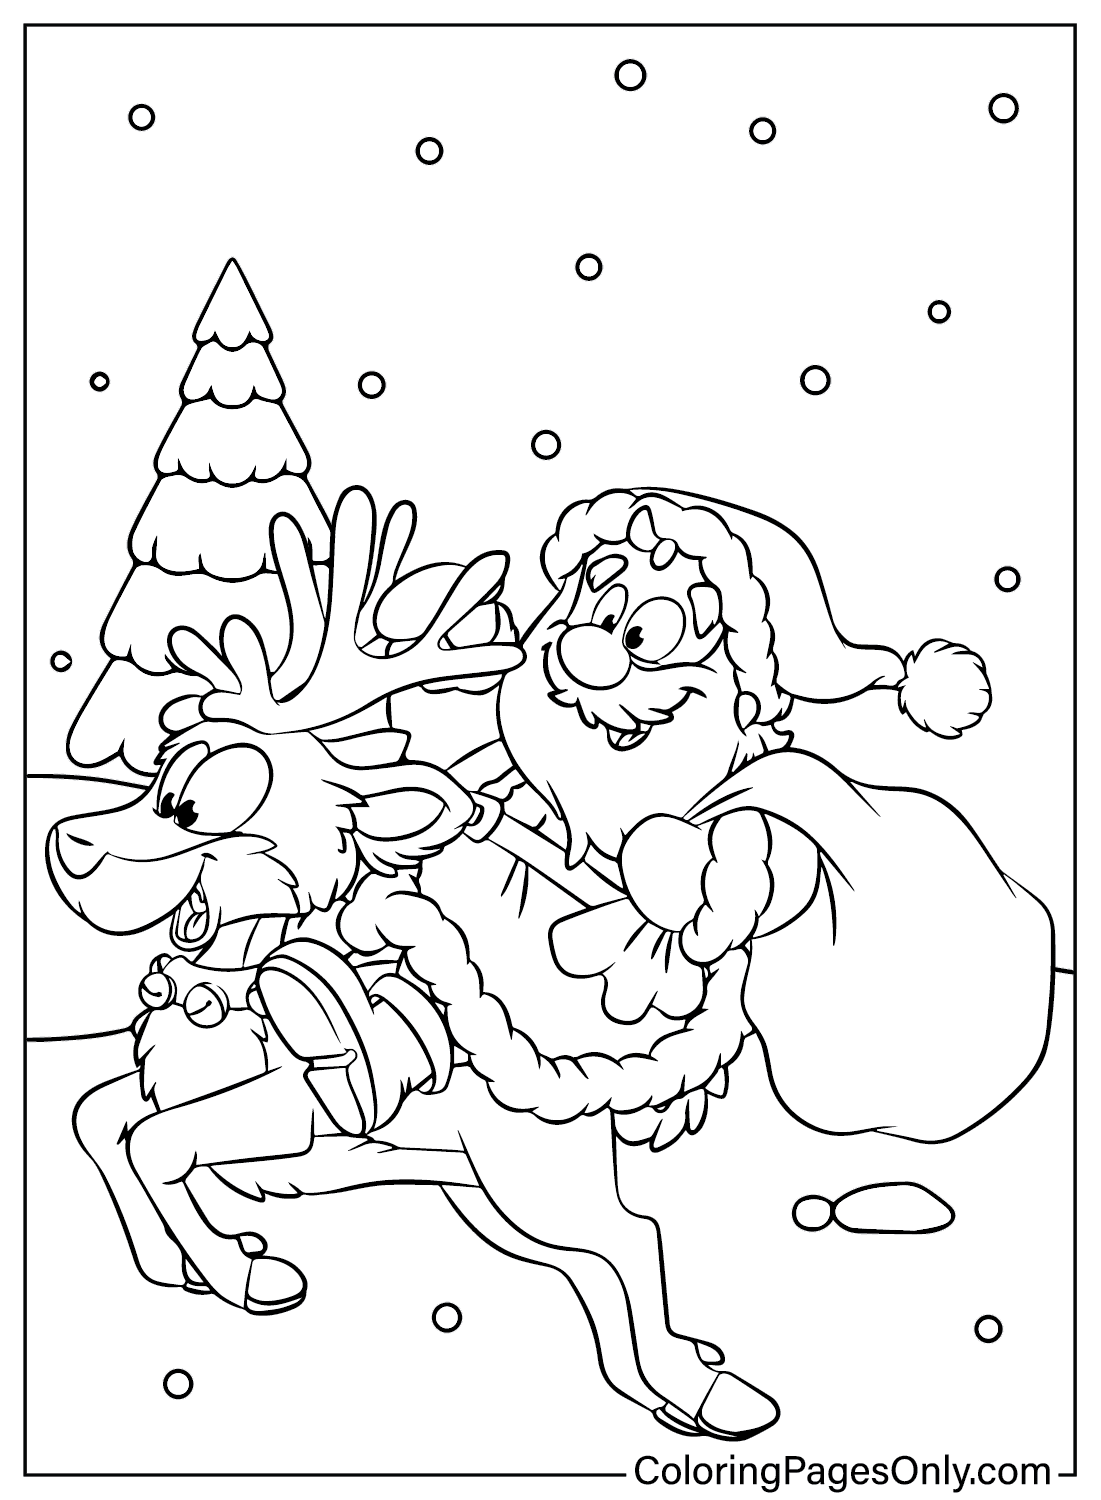 Santa Claus Pictures Coloring Page